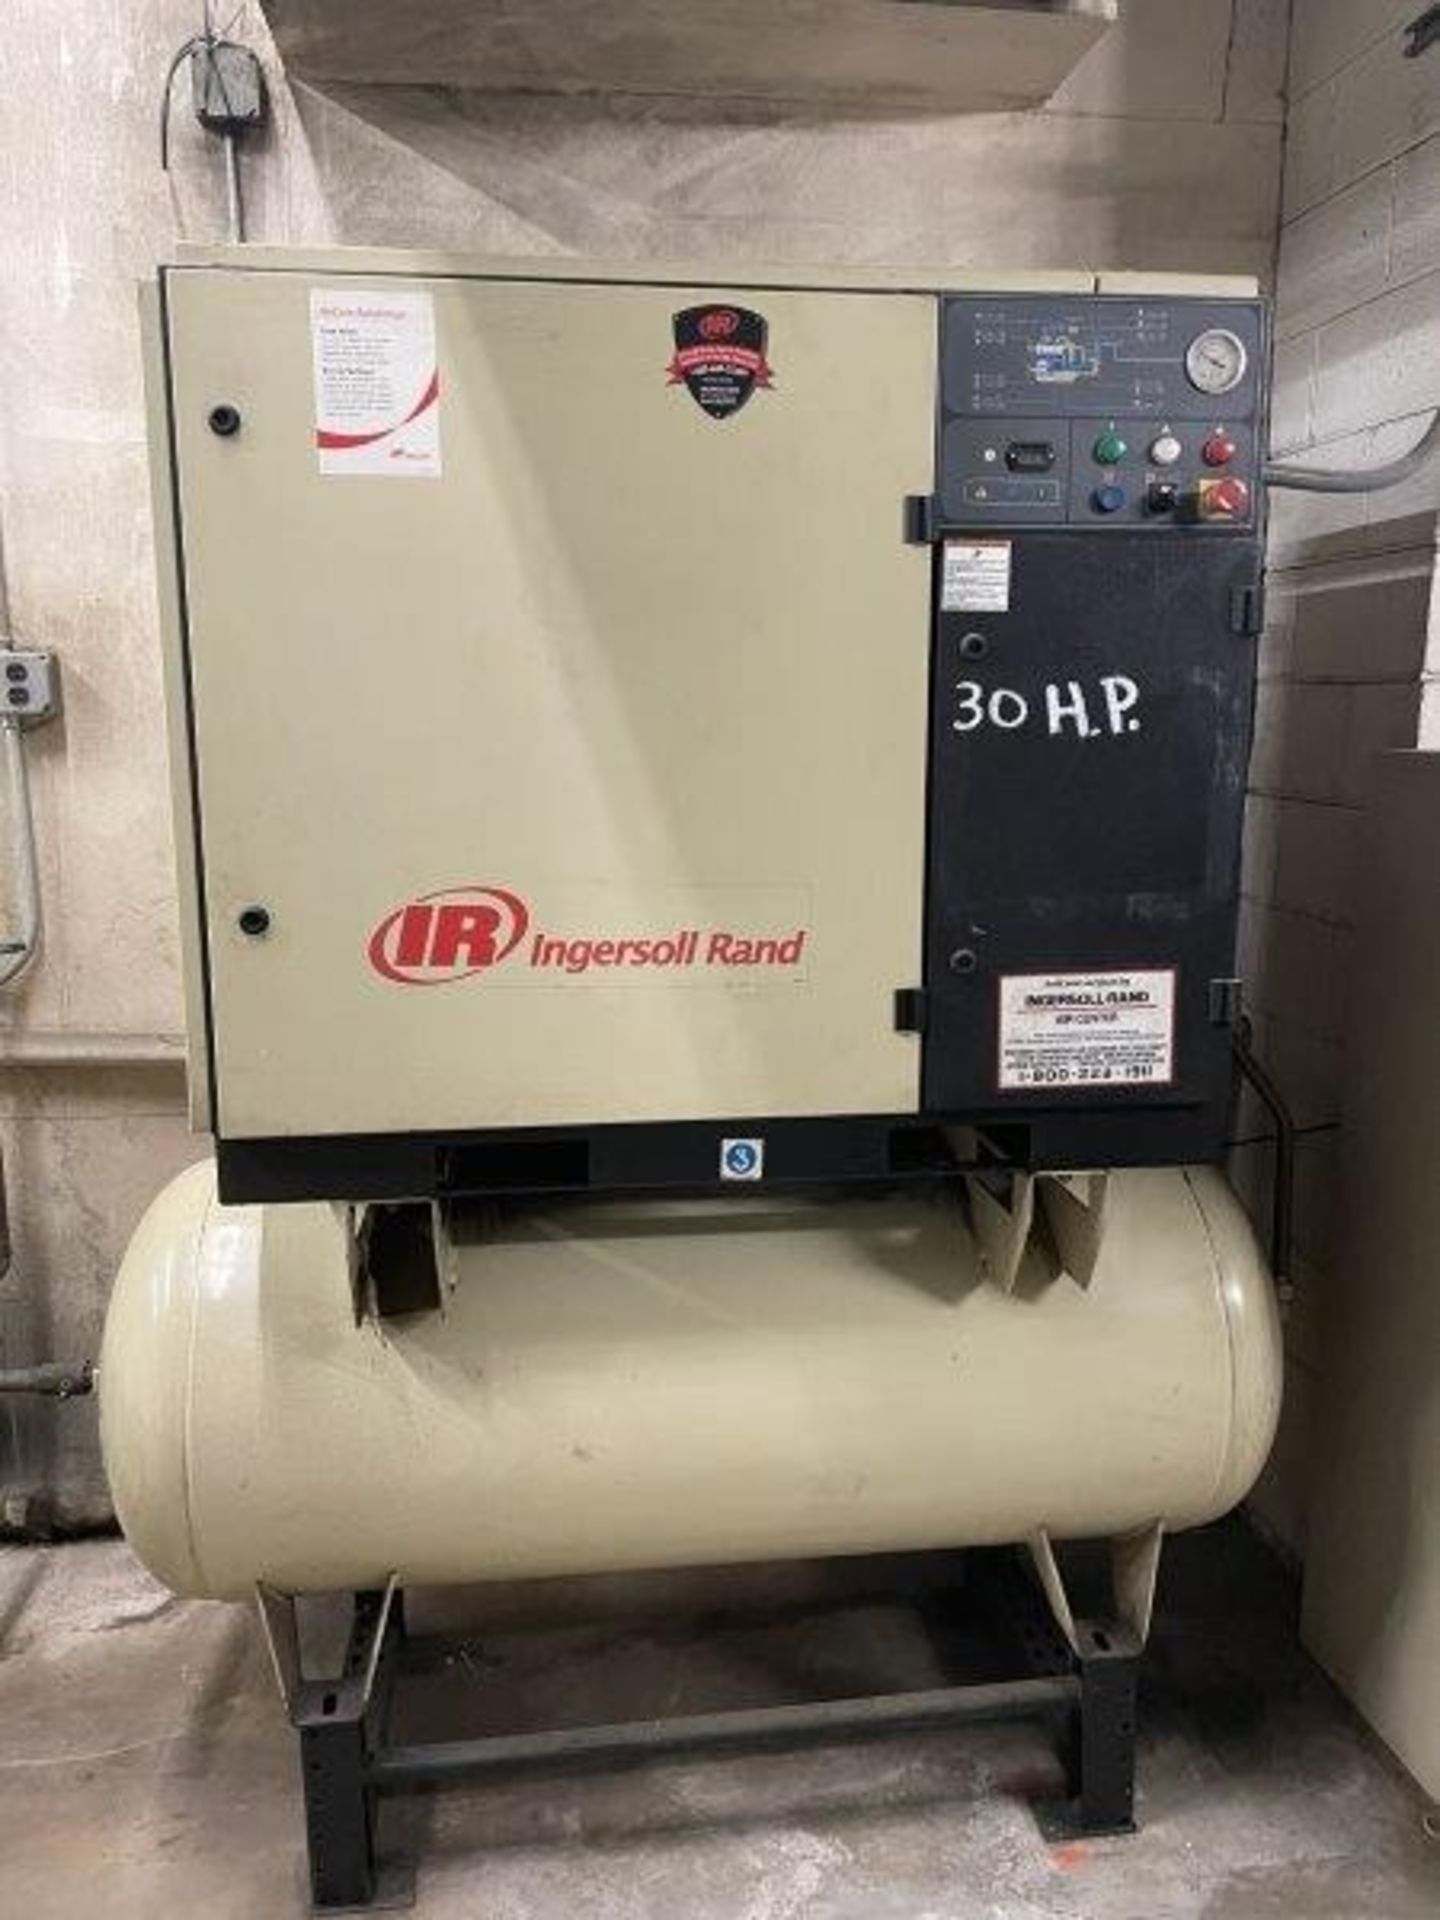 30 HP tank mounted Screw Air Compressor. Manufactured by Ingersol Rand. 125 psig max pressure, 120